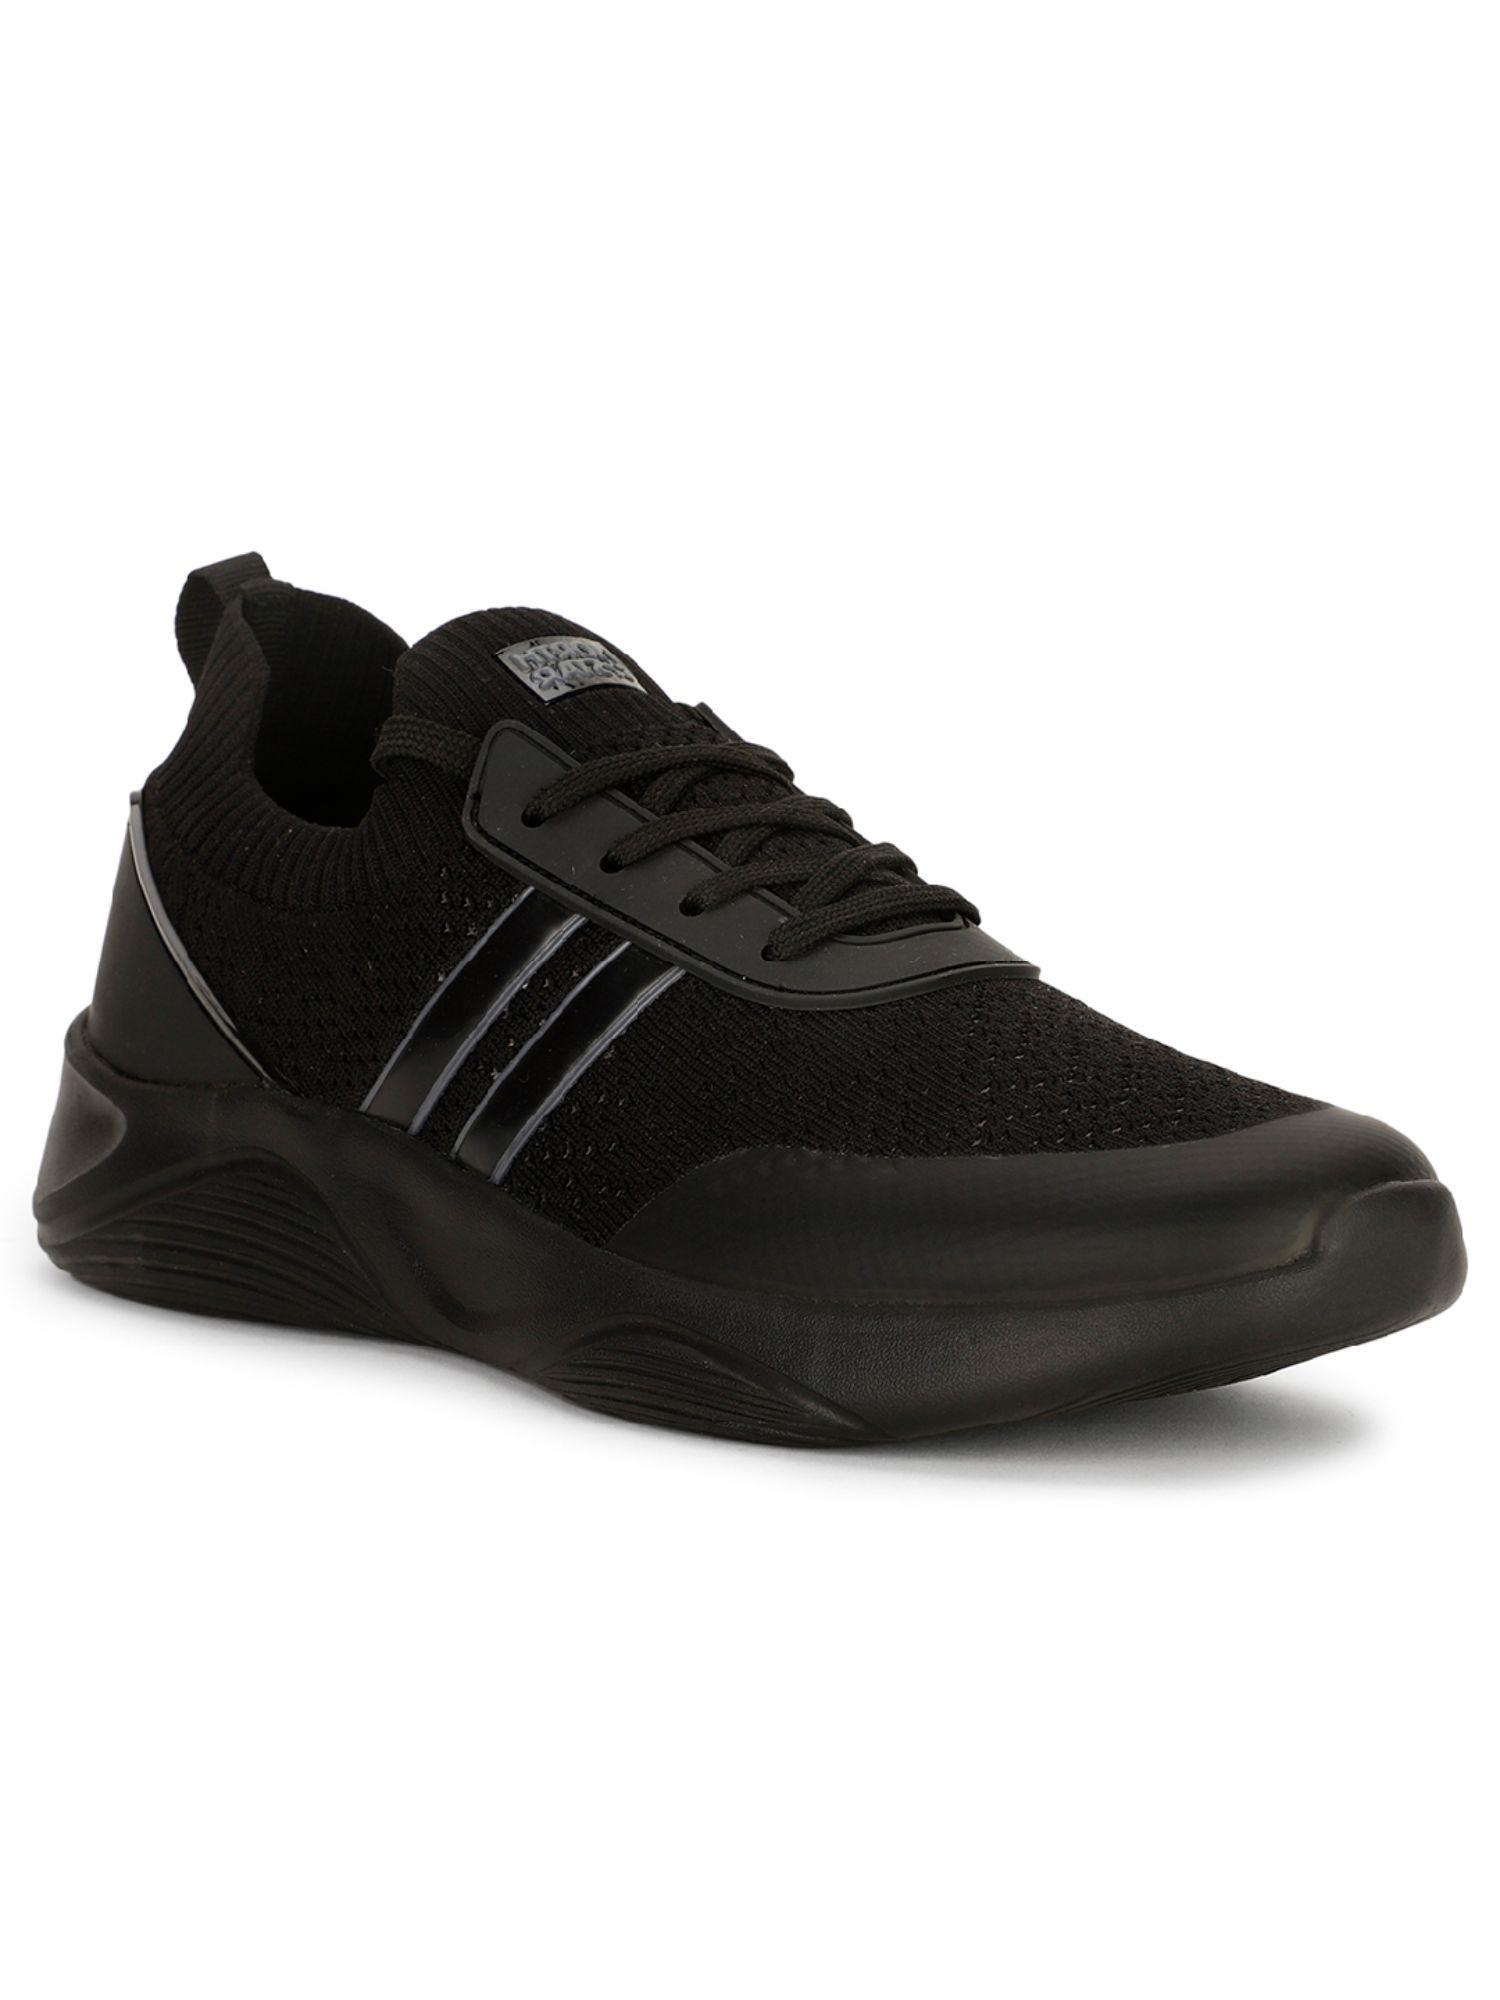 mens-black-lace-ups-running-shoes